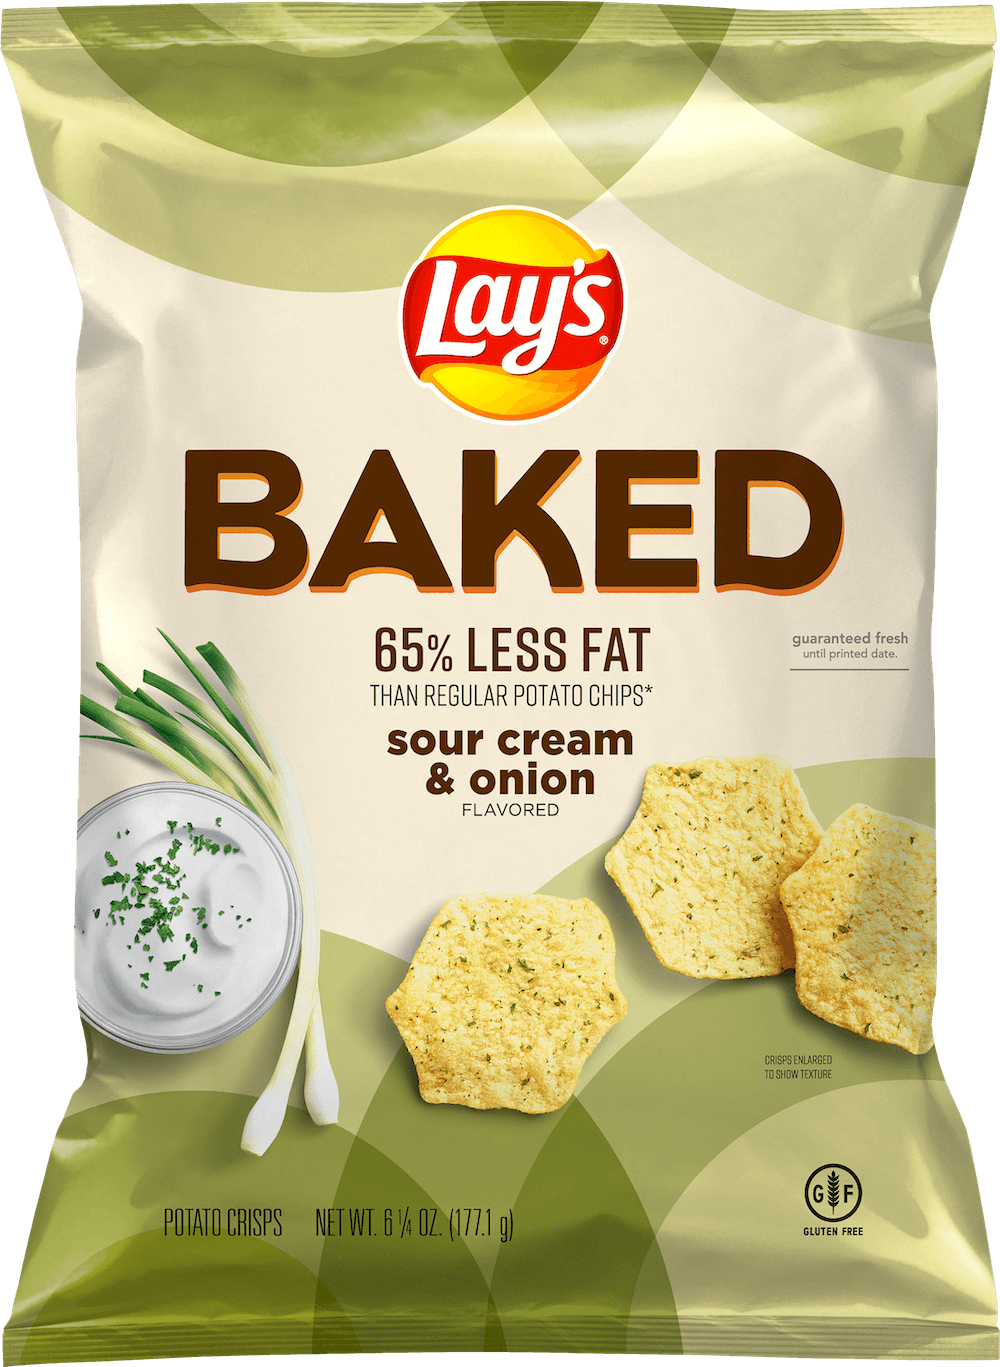 https://www.fritolay.com/sites/fritolay.com/files/2022-02/Baked_2021_Lays_SCO_6.25oz_Render.png